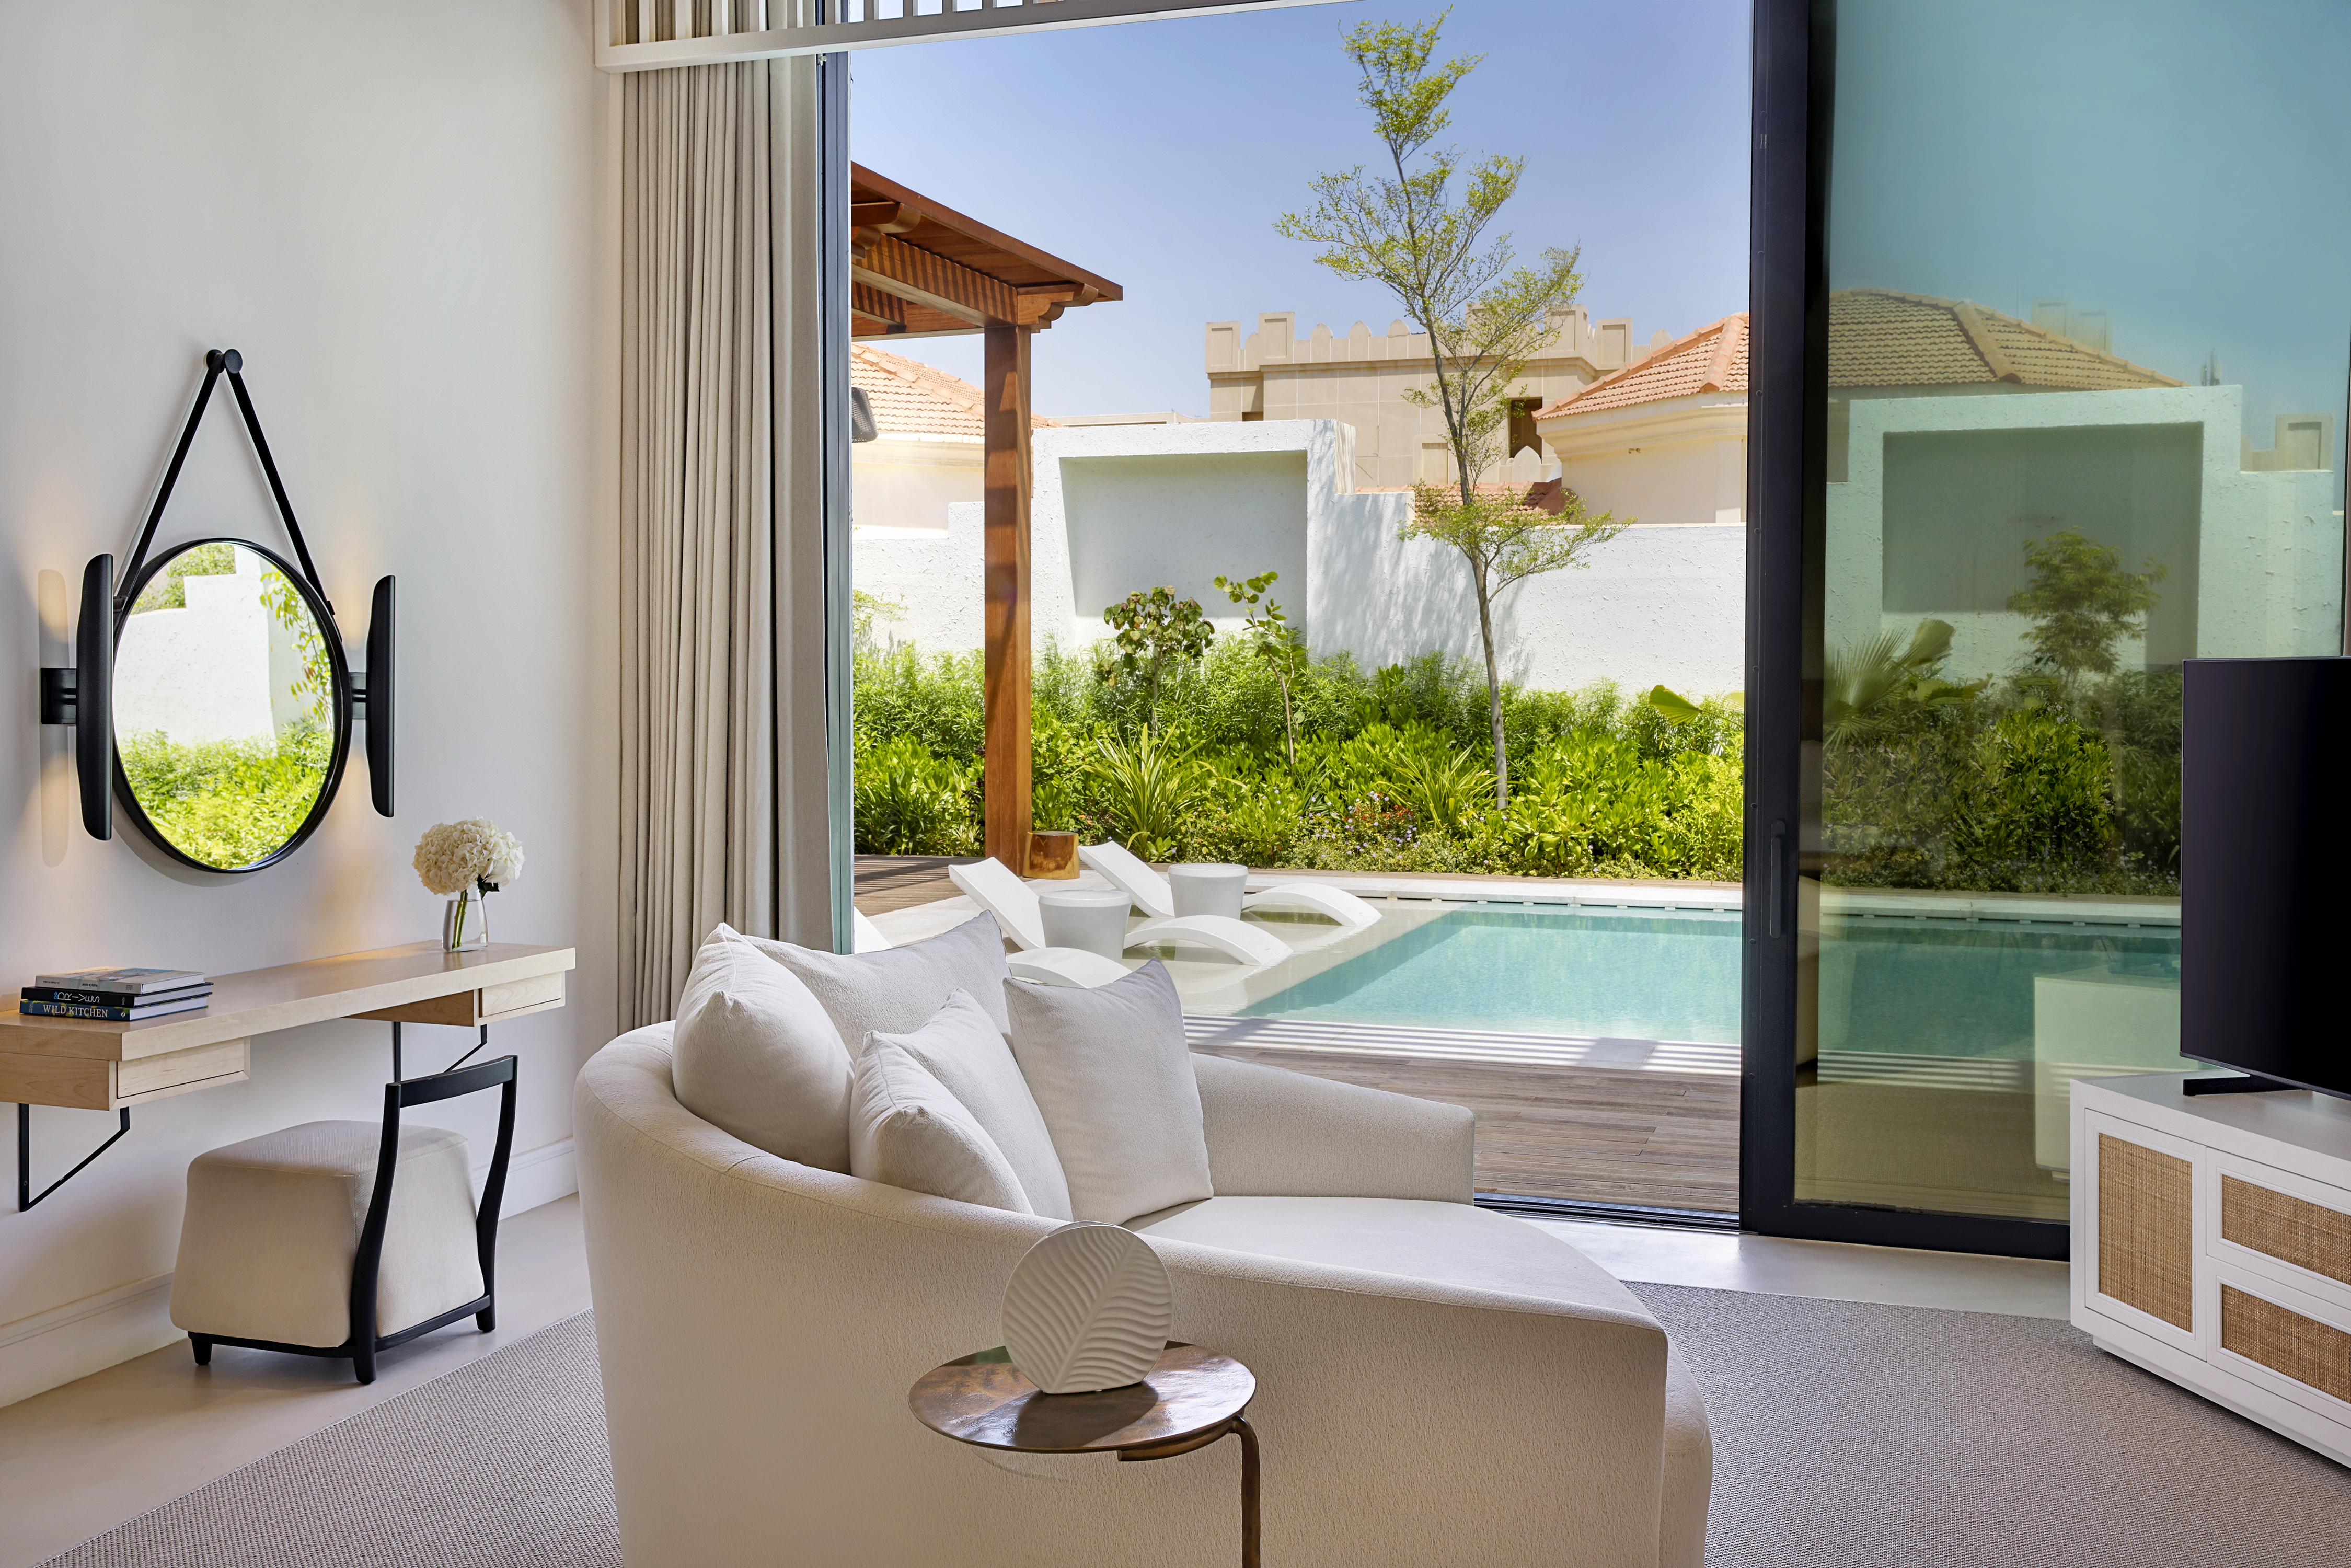 Suite Living Room with View of Private Outdoor Pool Area